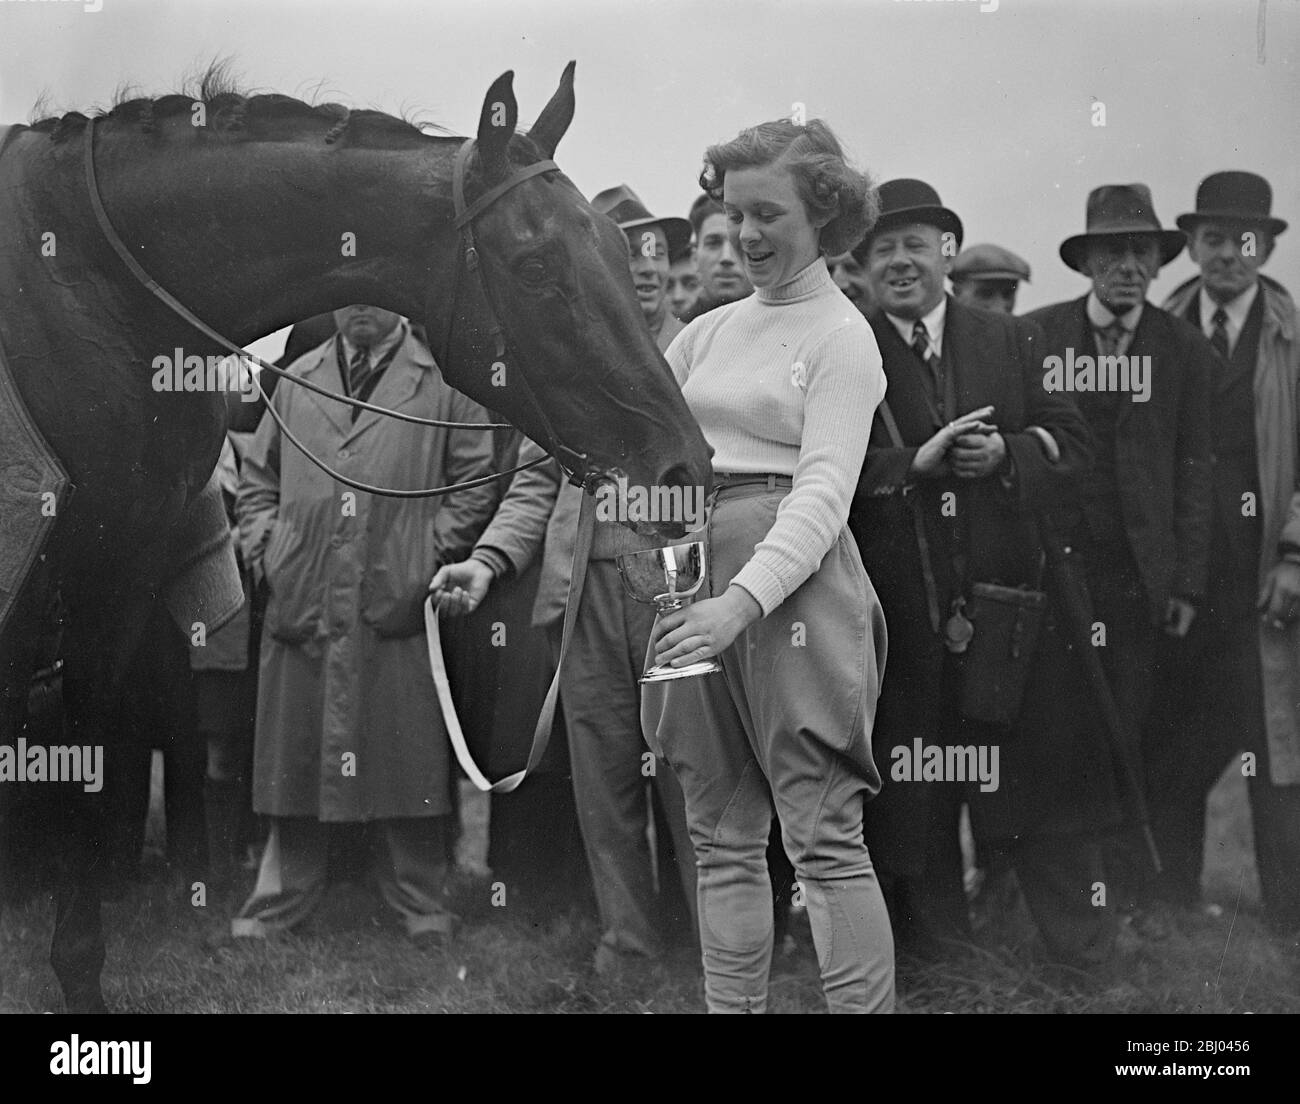 Jimmy petted!. - Trainers daughter wins historic race at Newmarket. - Riding Mr P Thrales 'Jimmy's pet' Miss A Thrale, daughter of the trainer, one the historic Newmarket Town Plate. The only event in which women riders take part, and Newmarket. - Photo shows, Miss A Thrale, the winner, giving her mount 'Jimmy's Pet', a drink from the cup. - 14 October 1937 Stock Photo